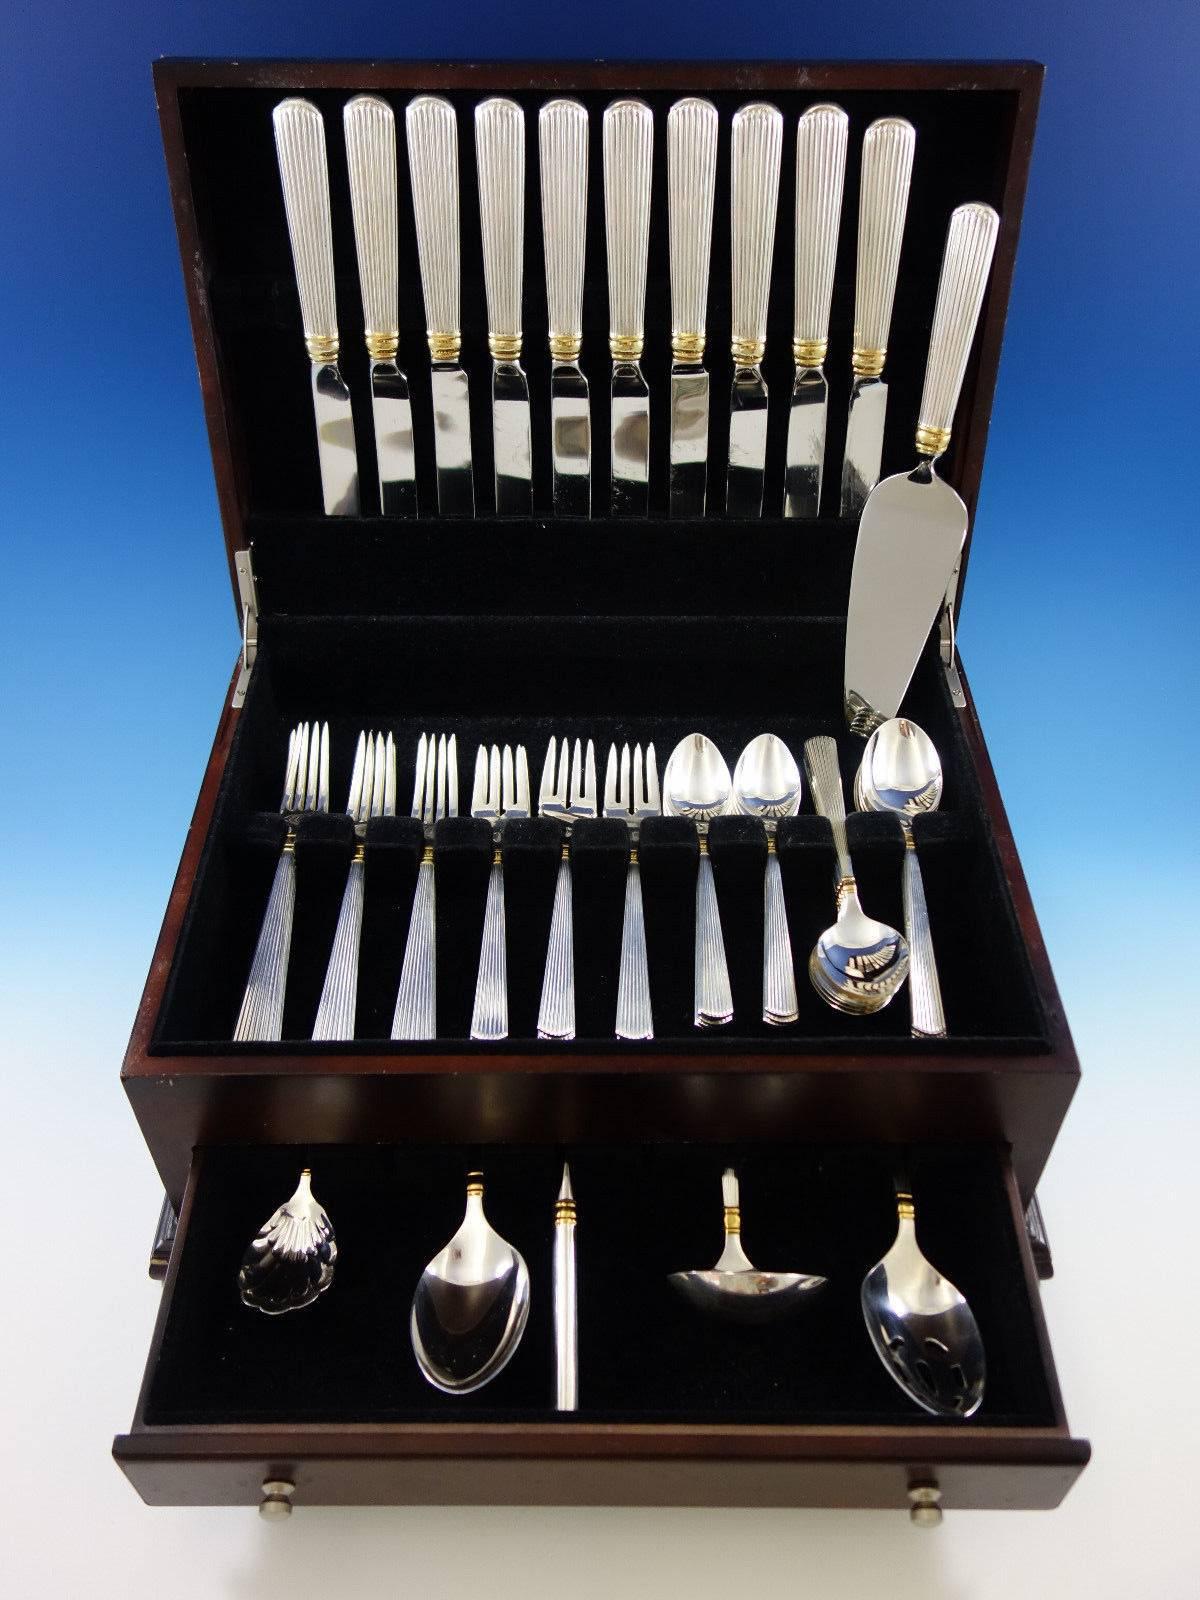 Dinner size golden ashmont (gold accent) by Reed & Barton sterling silver flatware set, 56 pieces. This set includes: 

Ten dinner size knives, knife blades vary slightly, 10